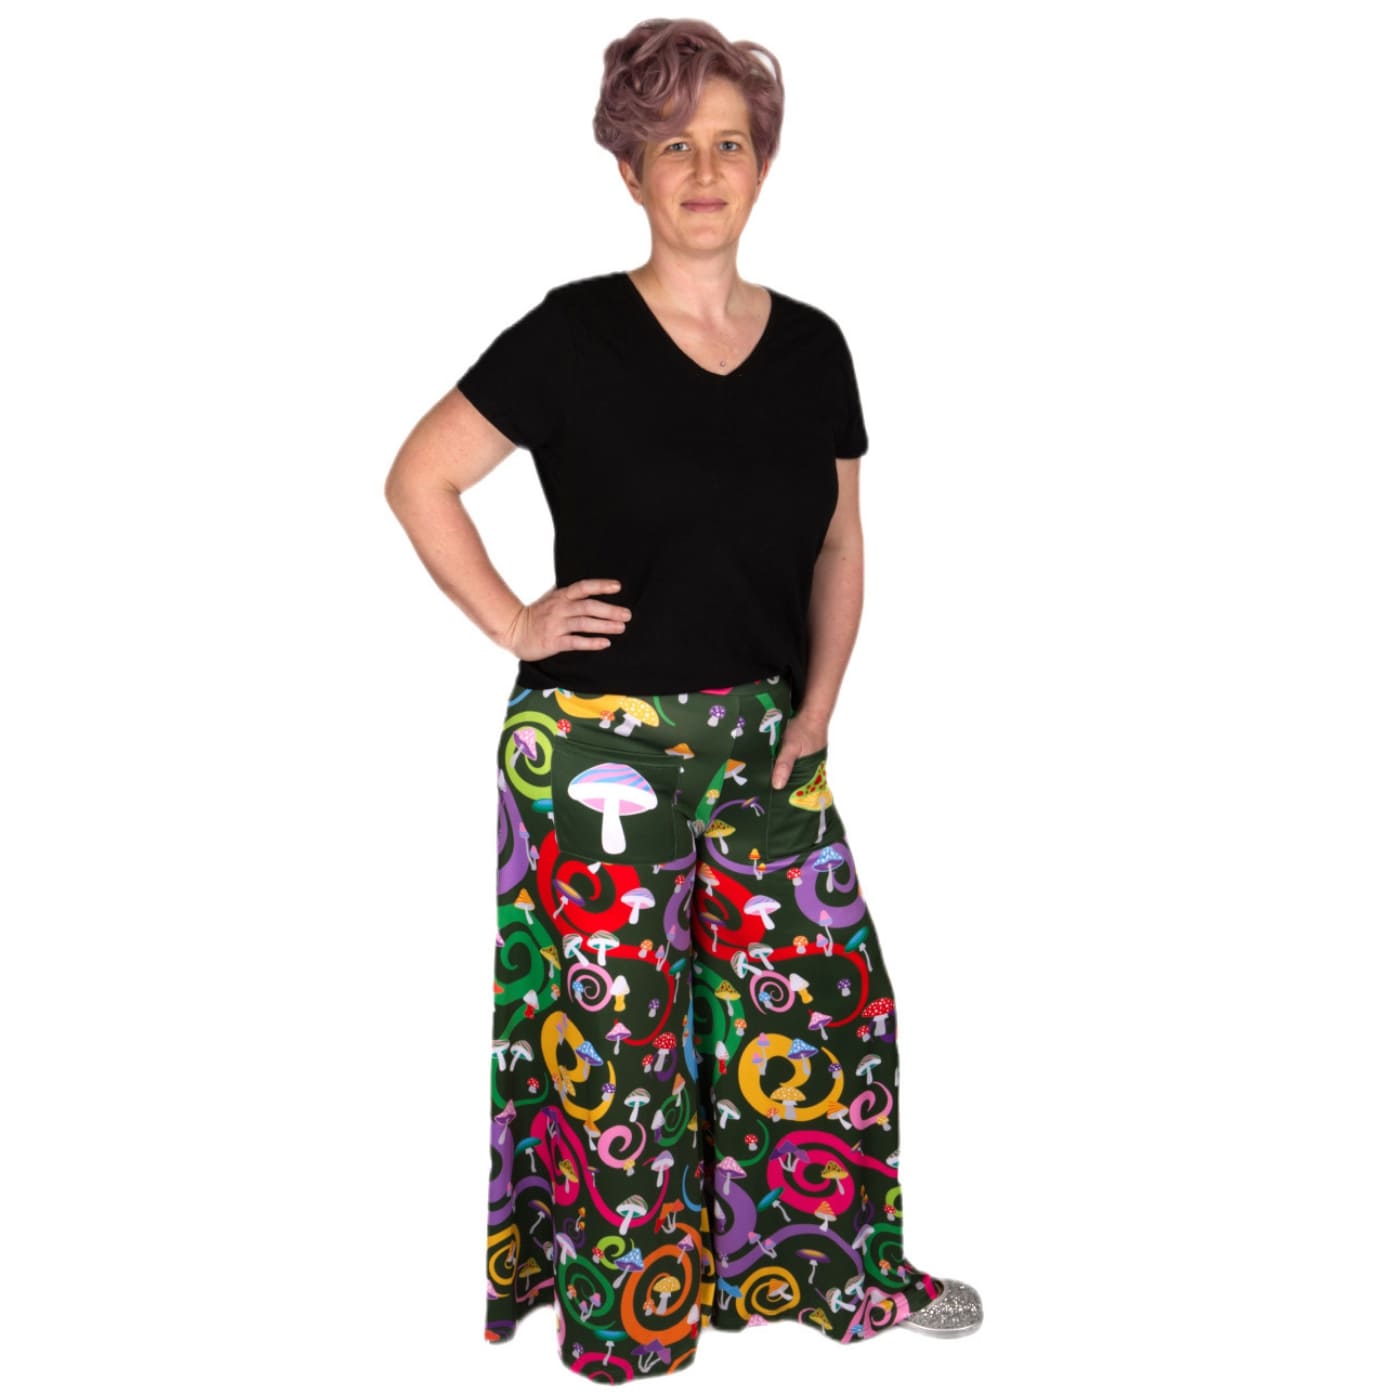 Toadstool Wide Leg Pants by RainbowsAndFairies.com.au (Mushroom - Psychedelic Swirl - Woodstock - Vintage Inspired - Flares - Pants With Pockets) - SKU: CL_WIDEL_TOADS_ORG - Pic-04